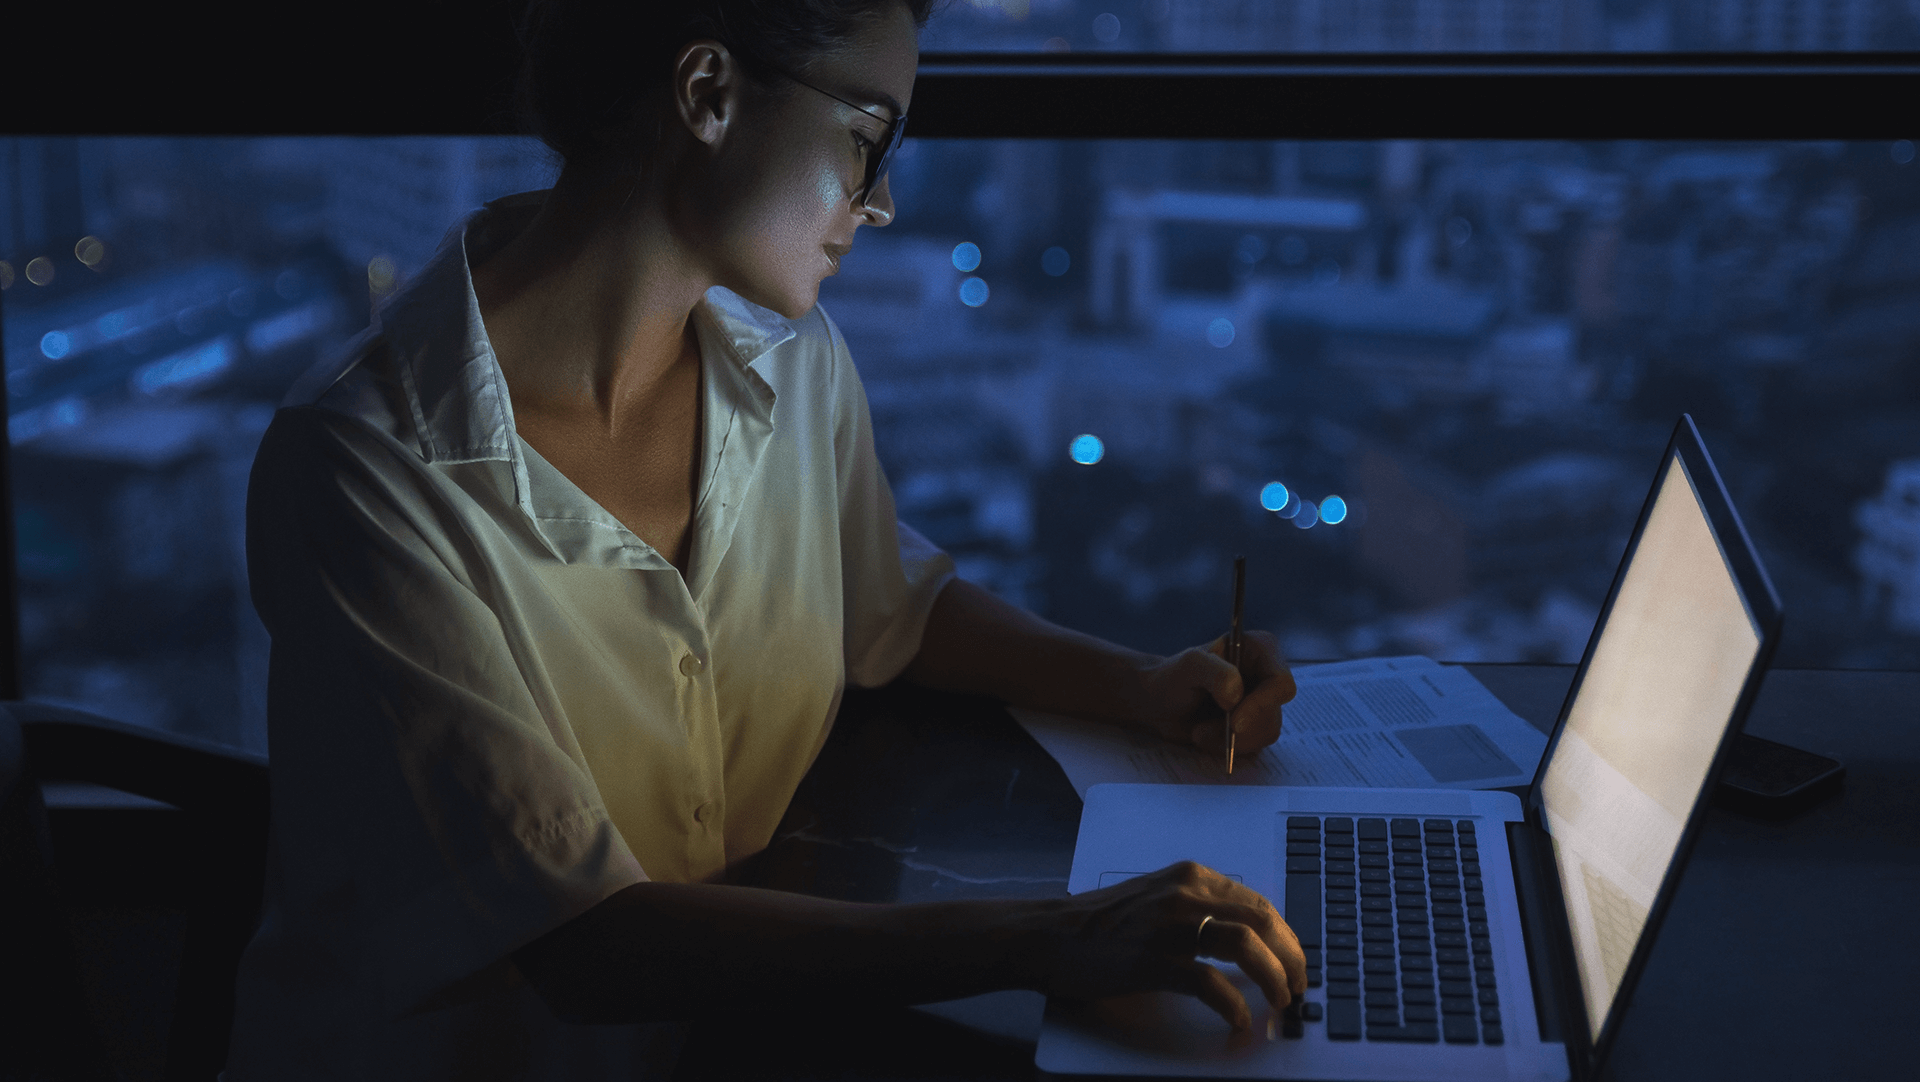 A focused individual working late at night on a laptop with papers, illuminated by the screen's glow against a backdrop of city lights.